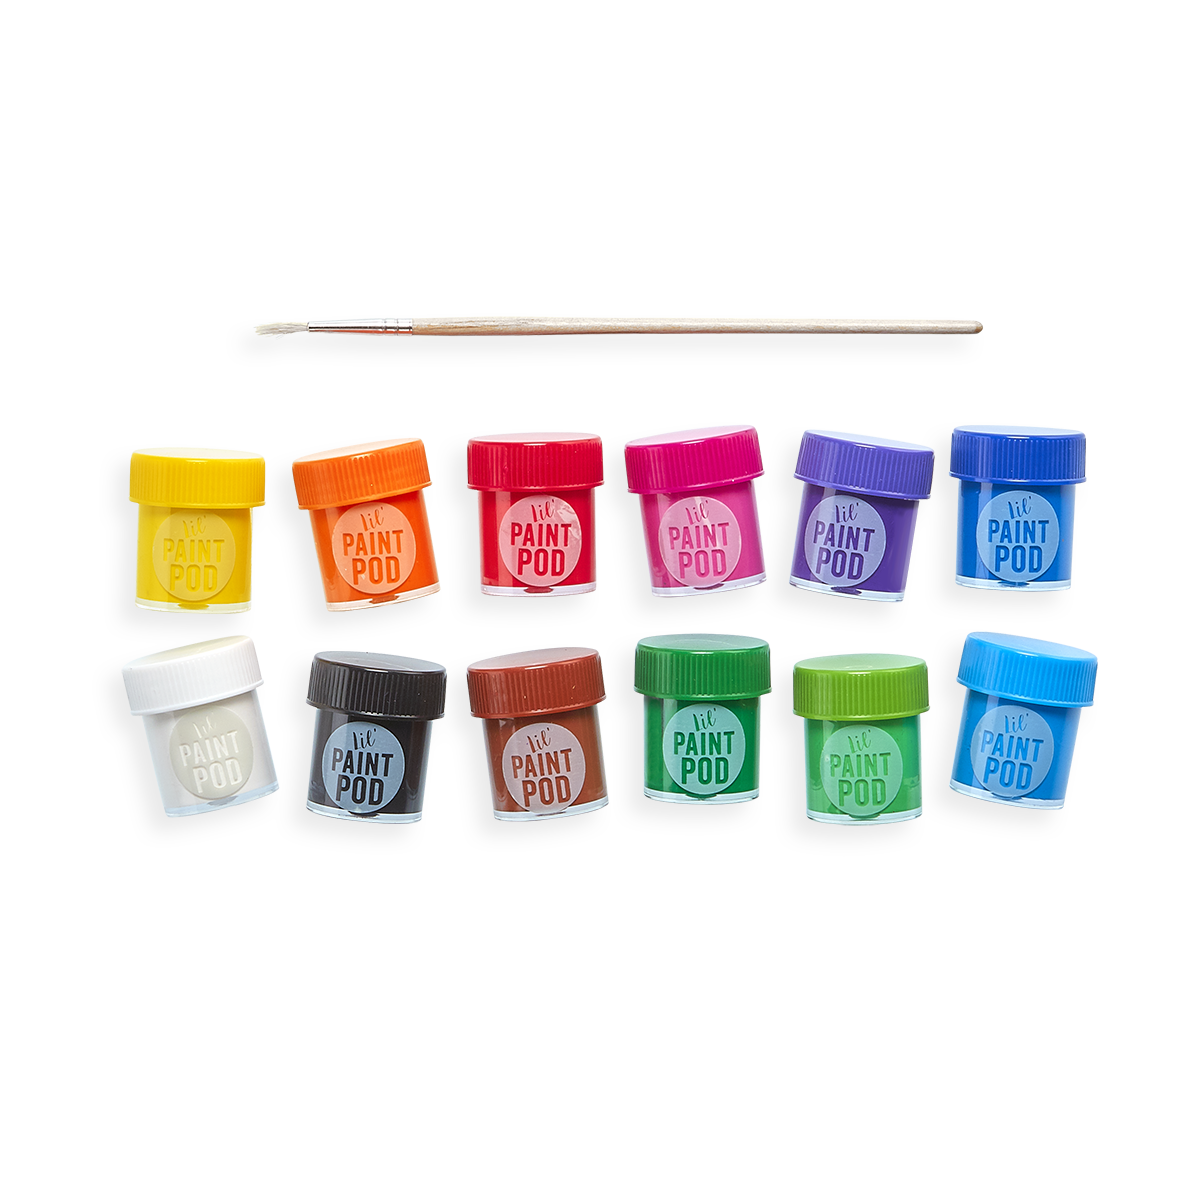 Classic Color lil' Poster Paint Pods and brush out of packaging